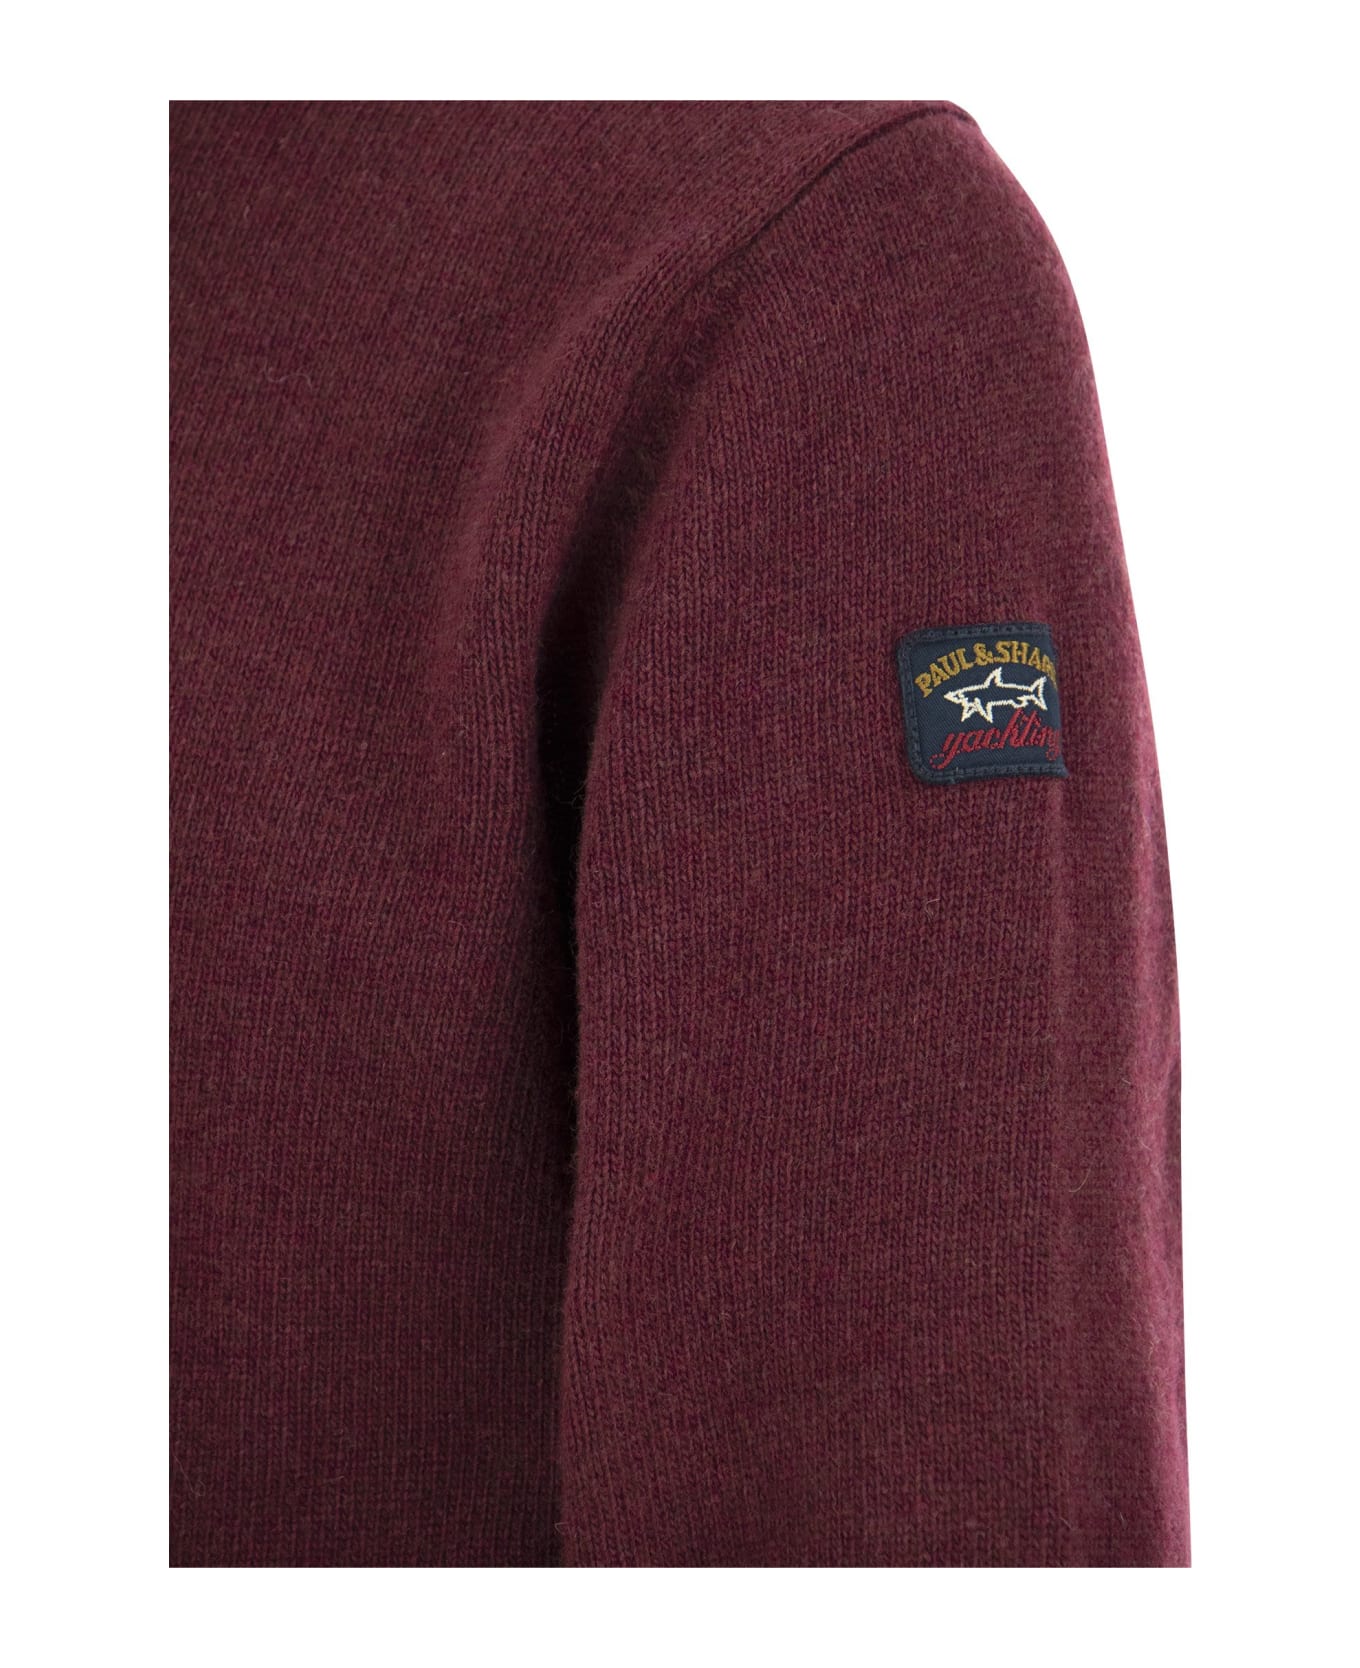 Paul&Shark Wool Crew Neck With Arm Patch - Bordeaux ニットウェア